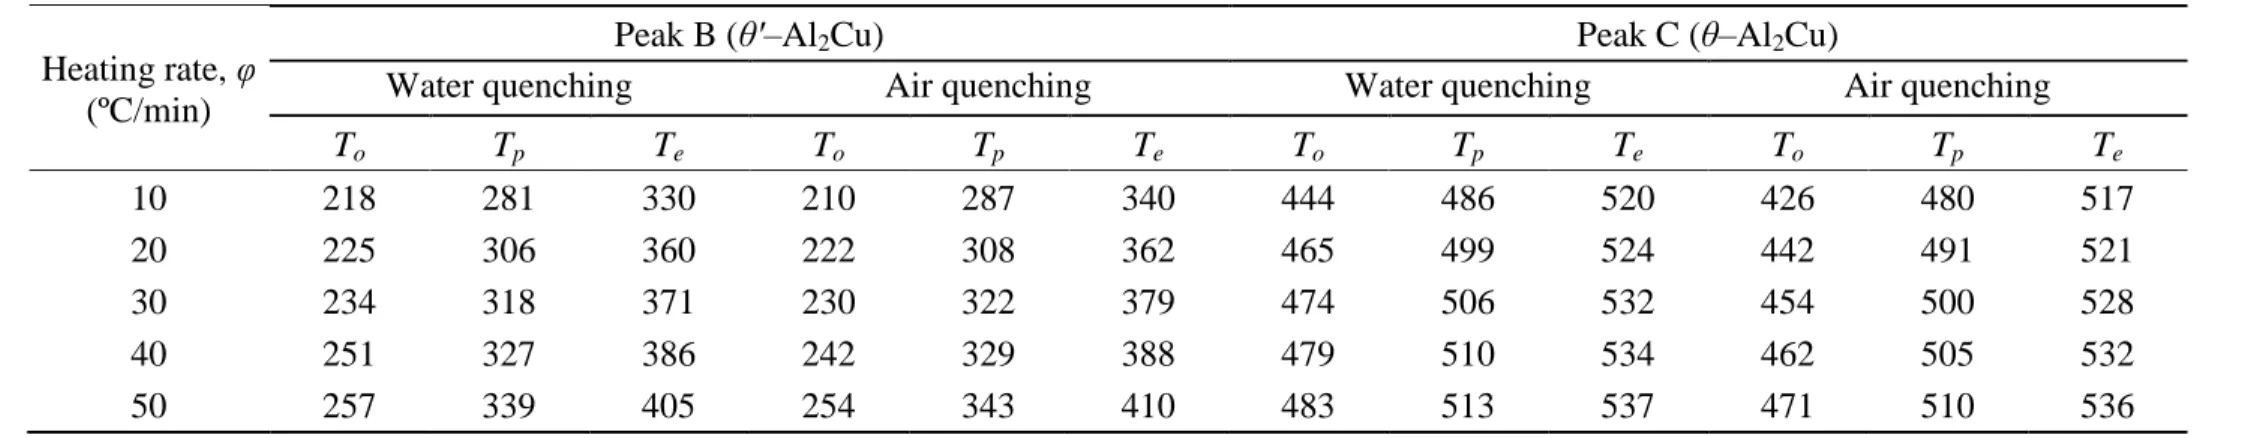 Table 2 Average values of the onset, peak and ending temperatures of peaks B and C at different heating rates under water- and air- air-quenching conditions (see Figs